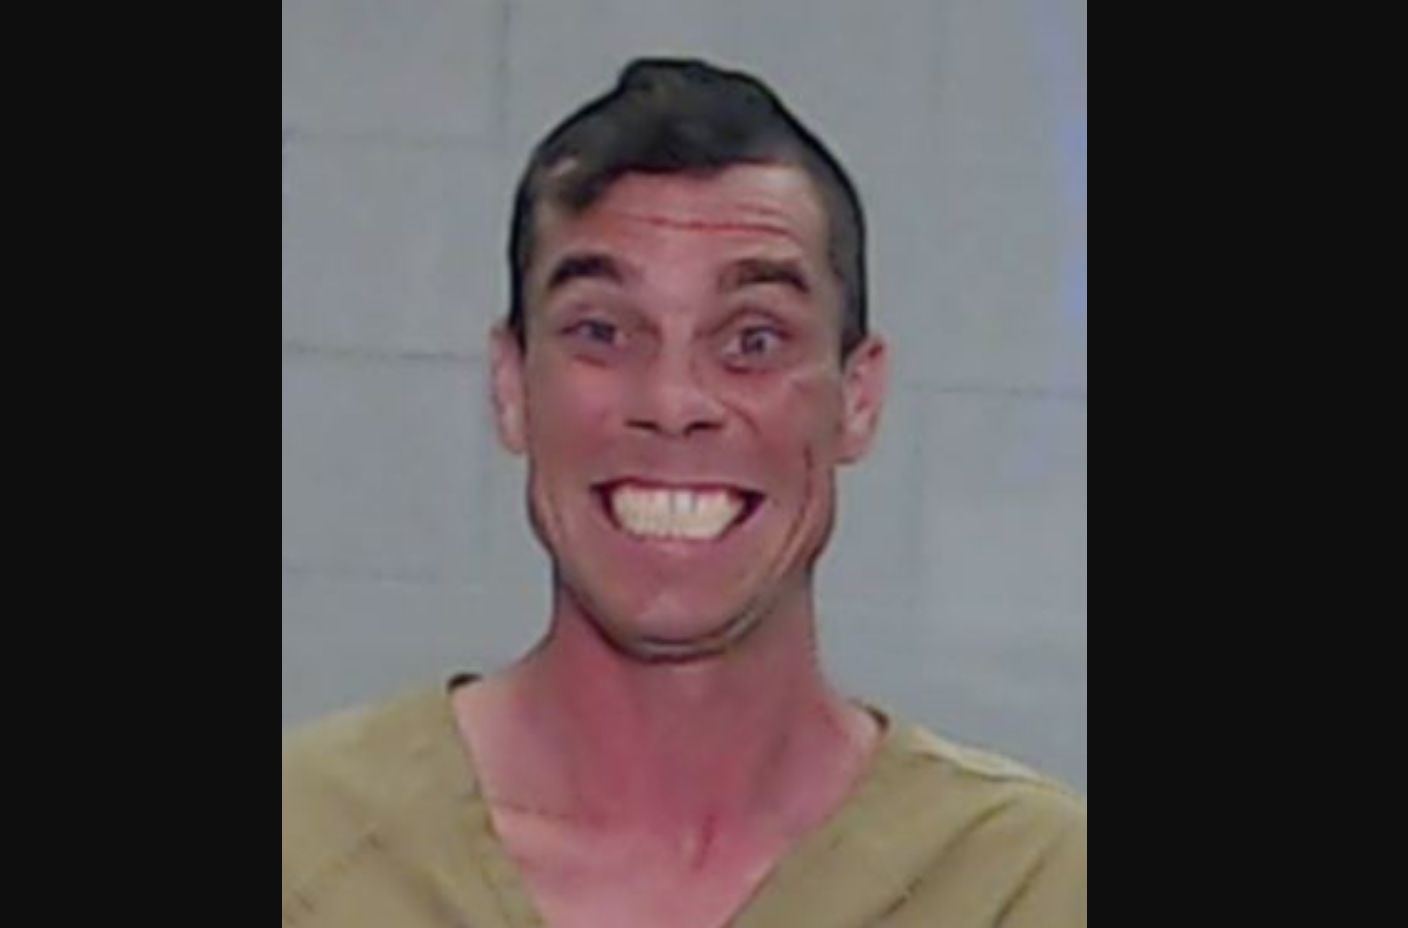 America's Happiest Criminal? Texas Police Release Grinning Suspect's